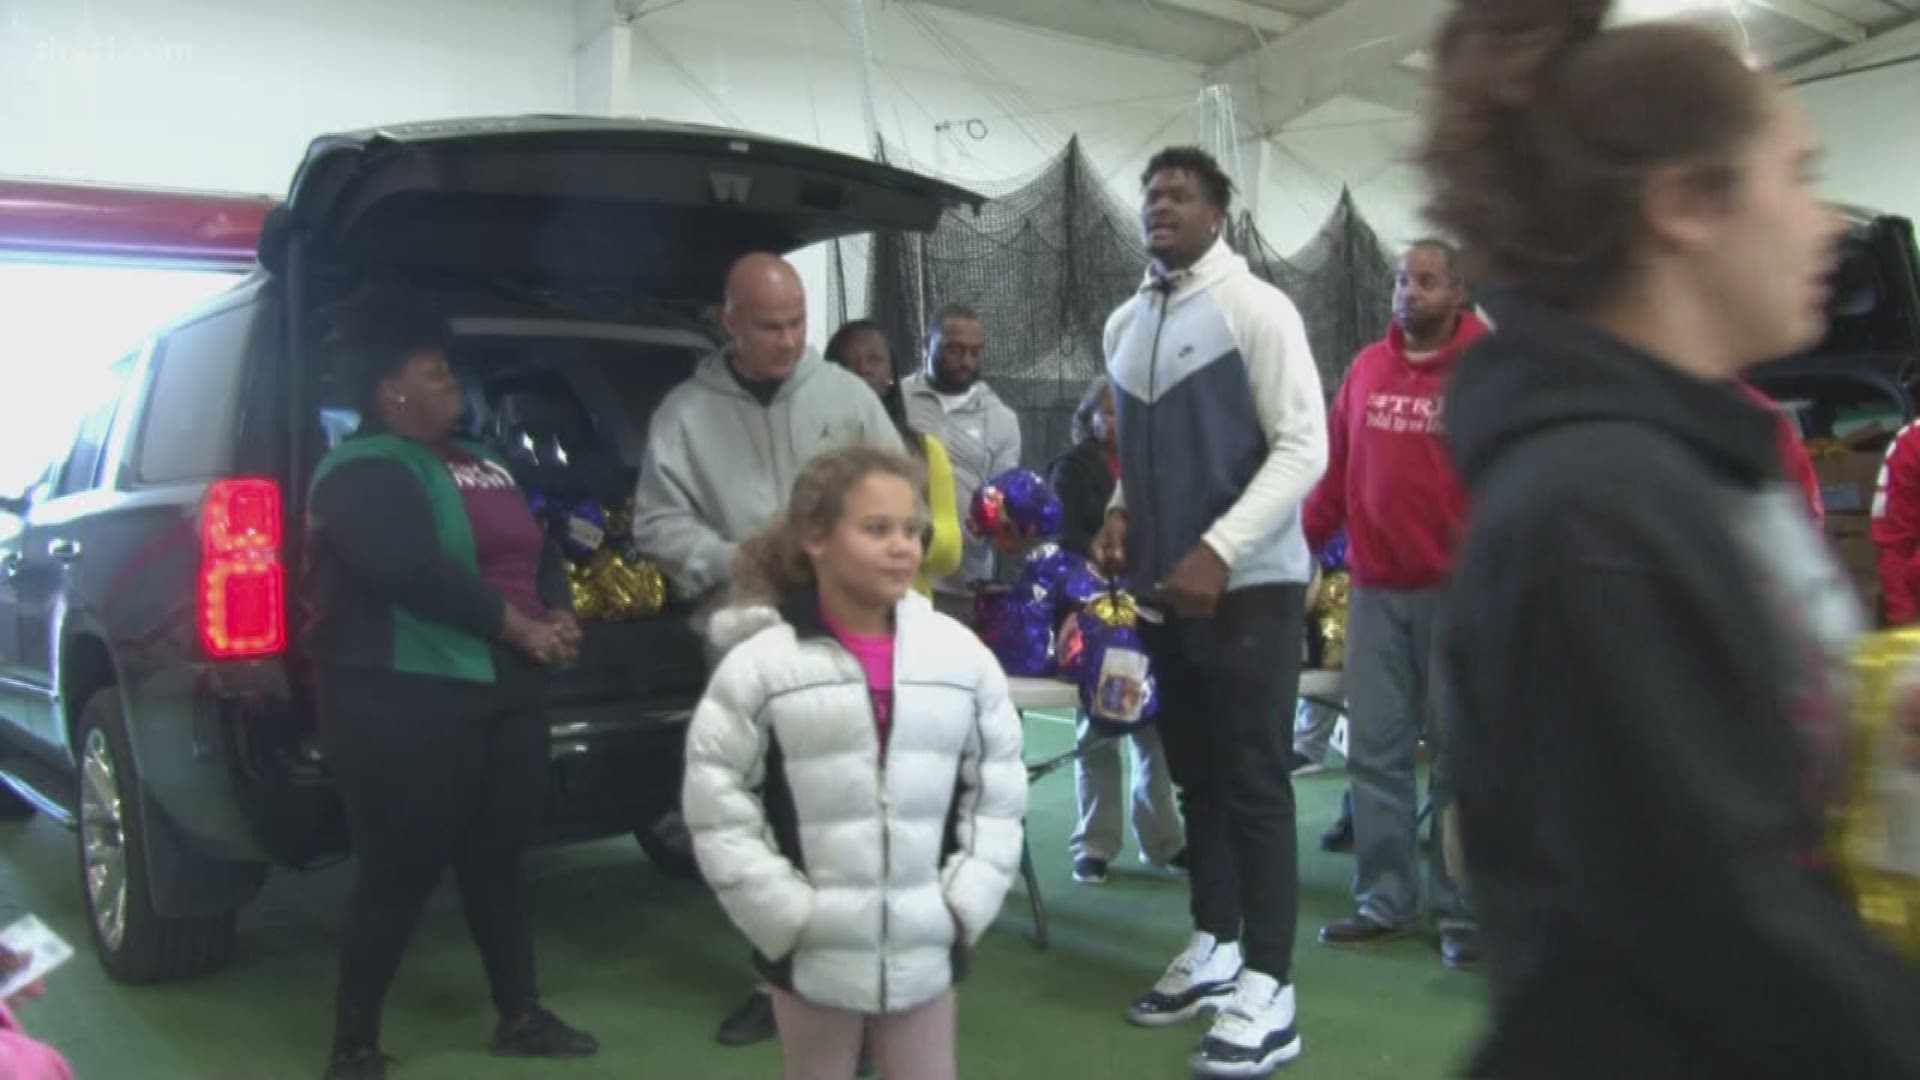 NFL player raised in Jacksonville gives back to community